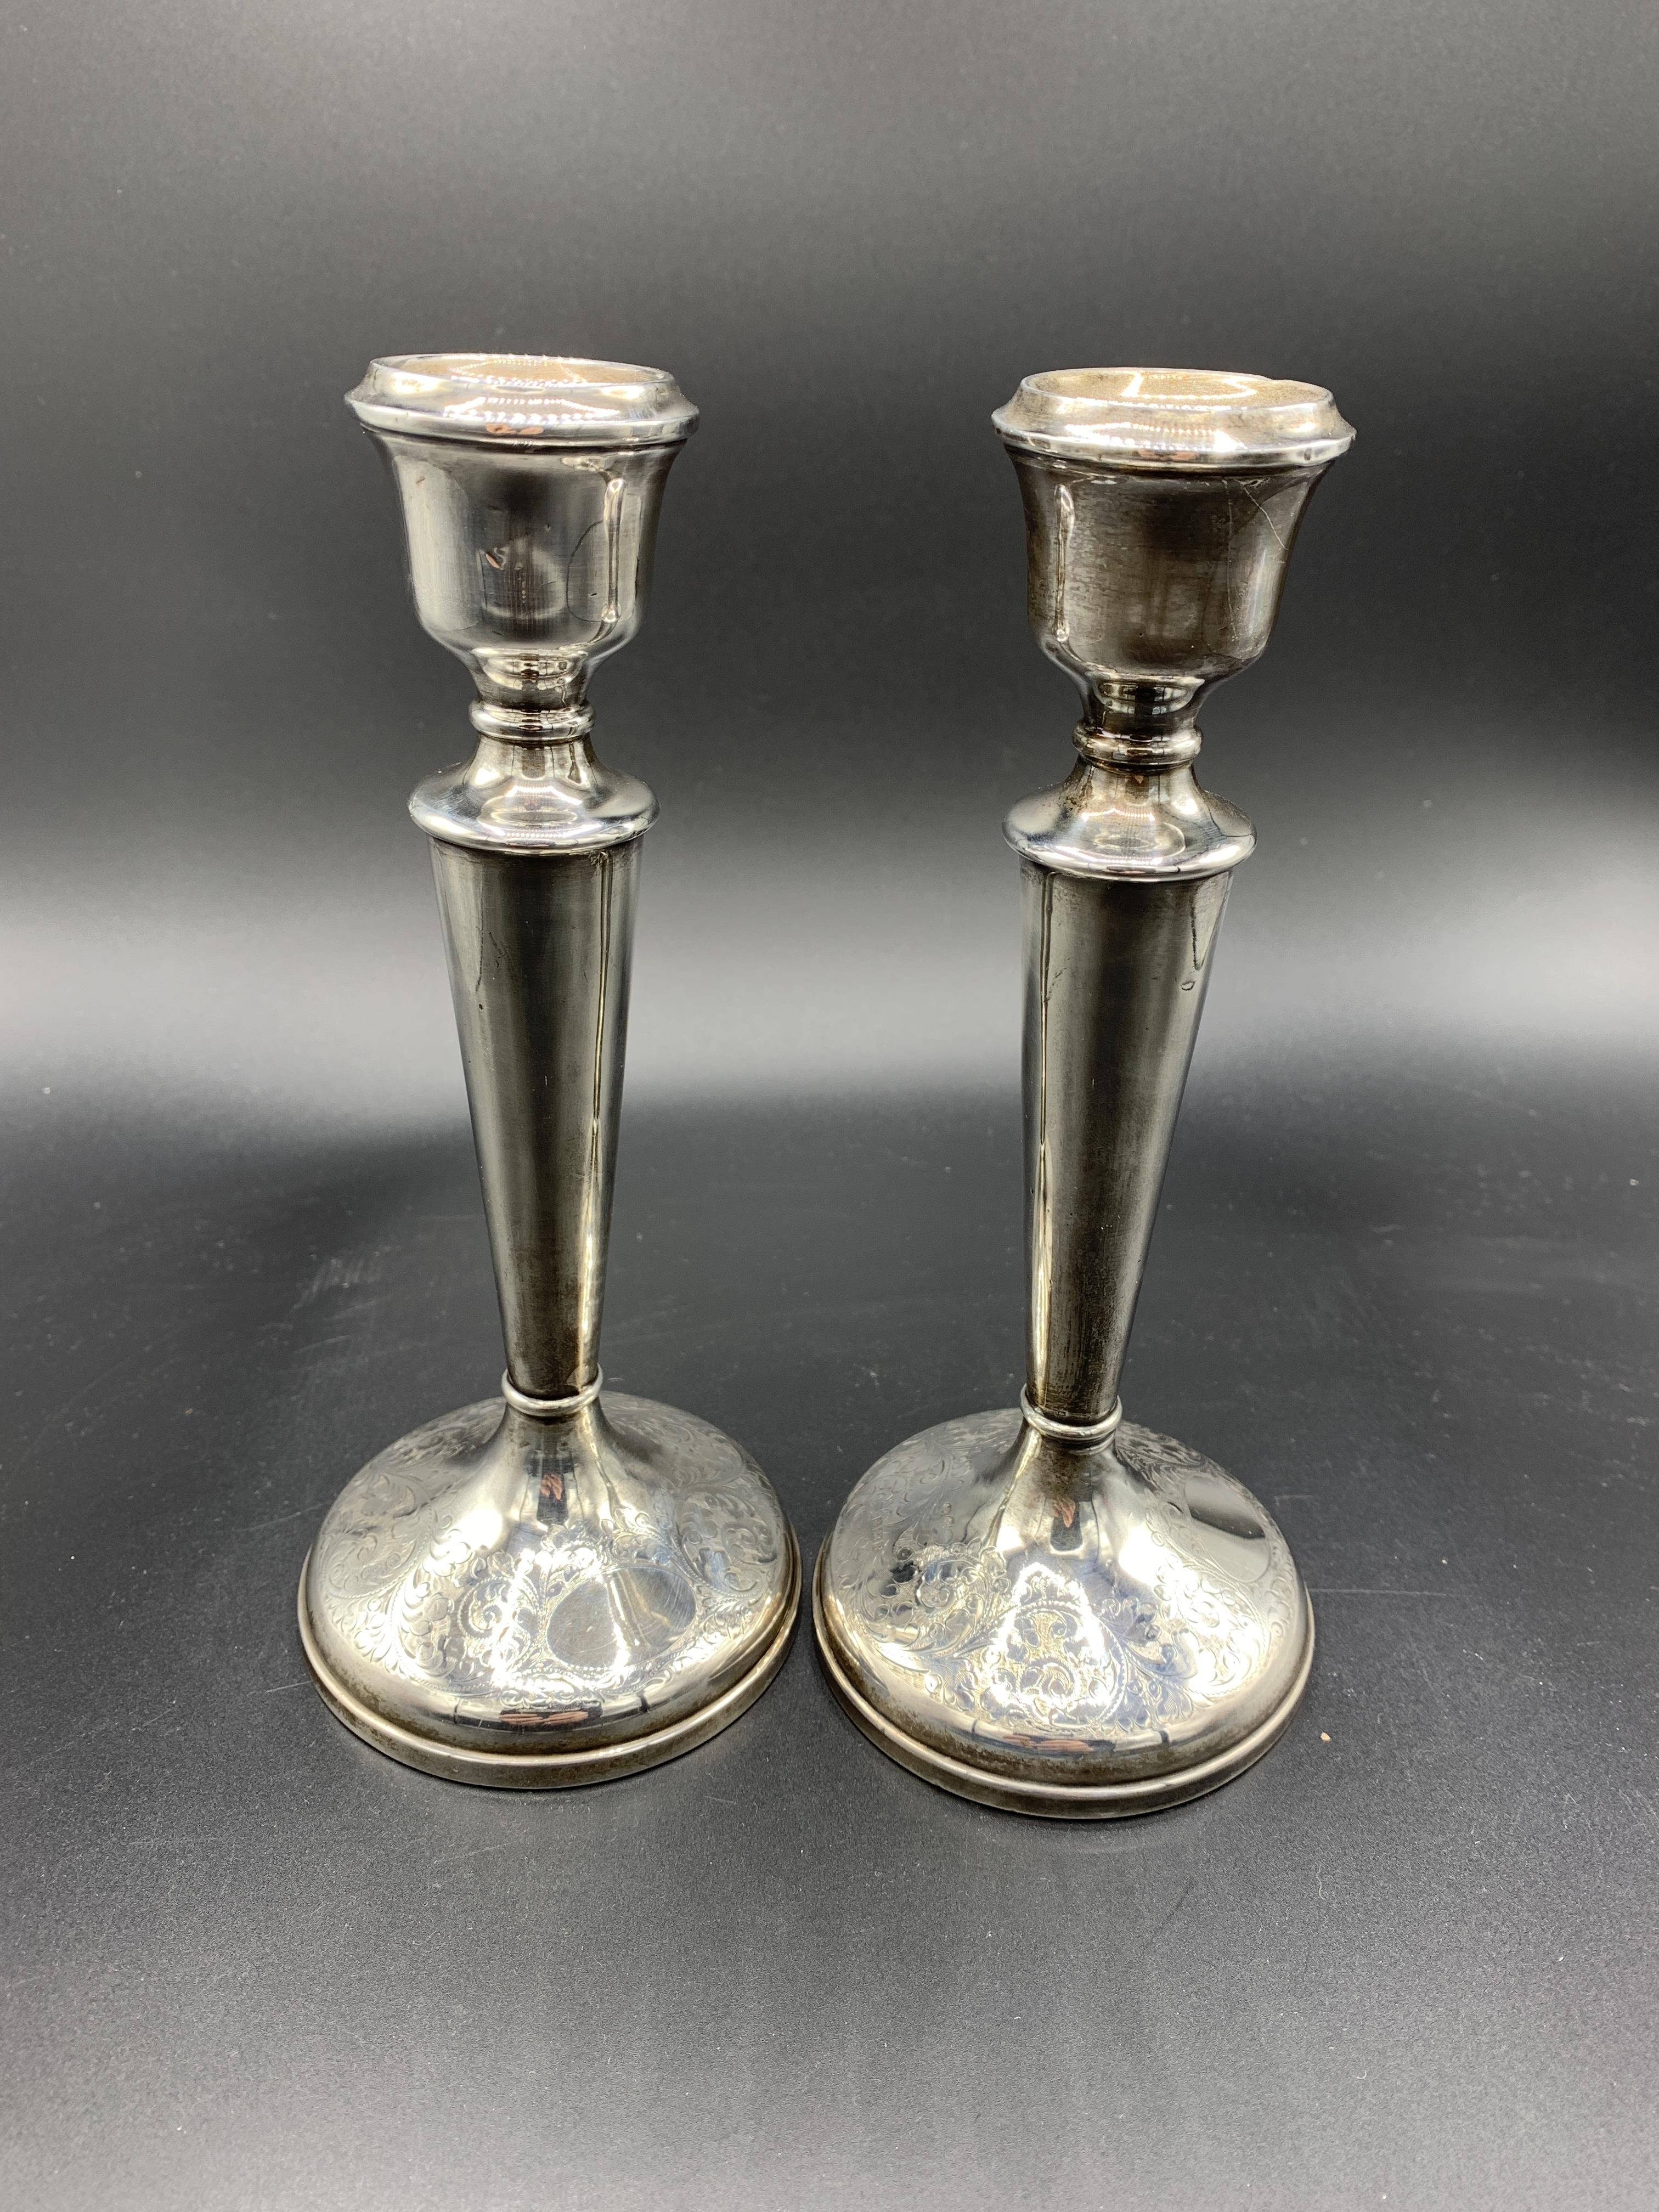 A pair of silver candlesticks by Charles S Green & Co Ltd